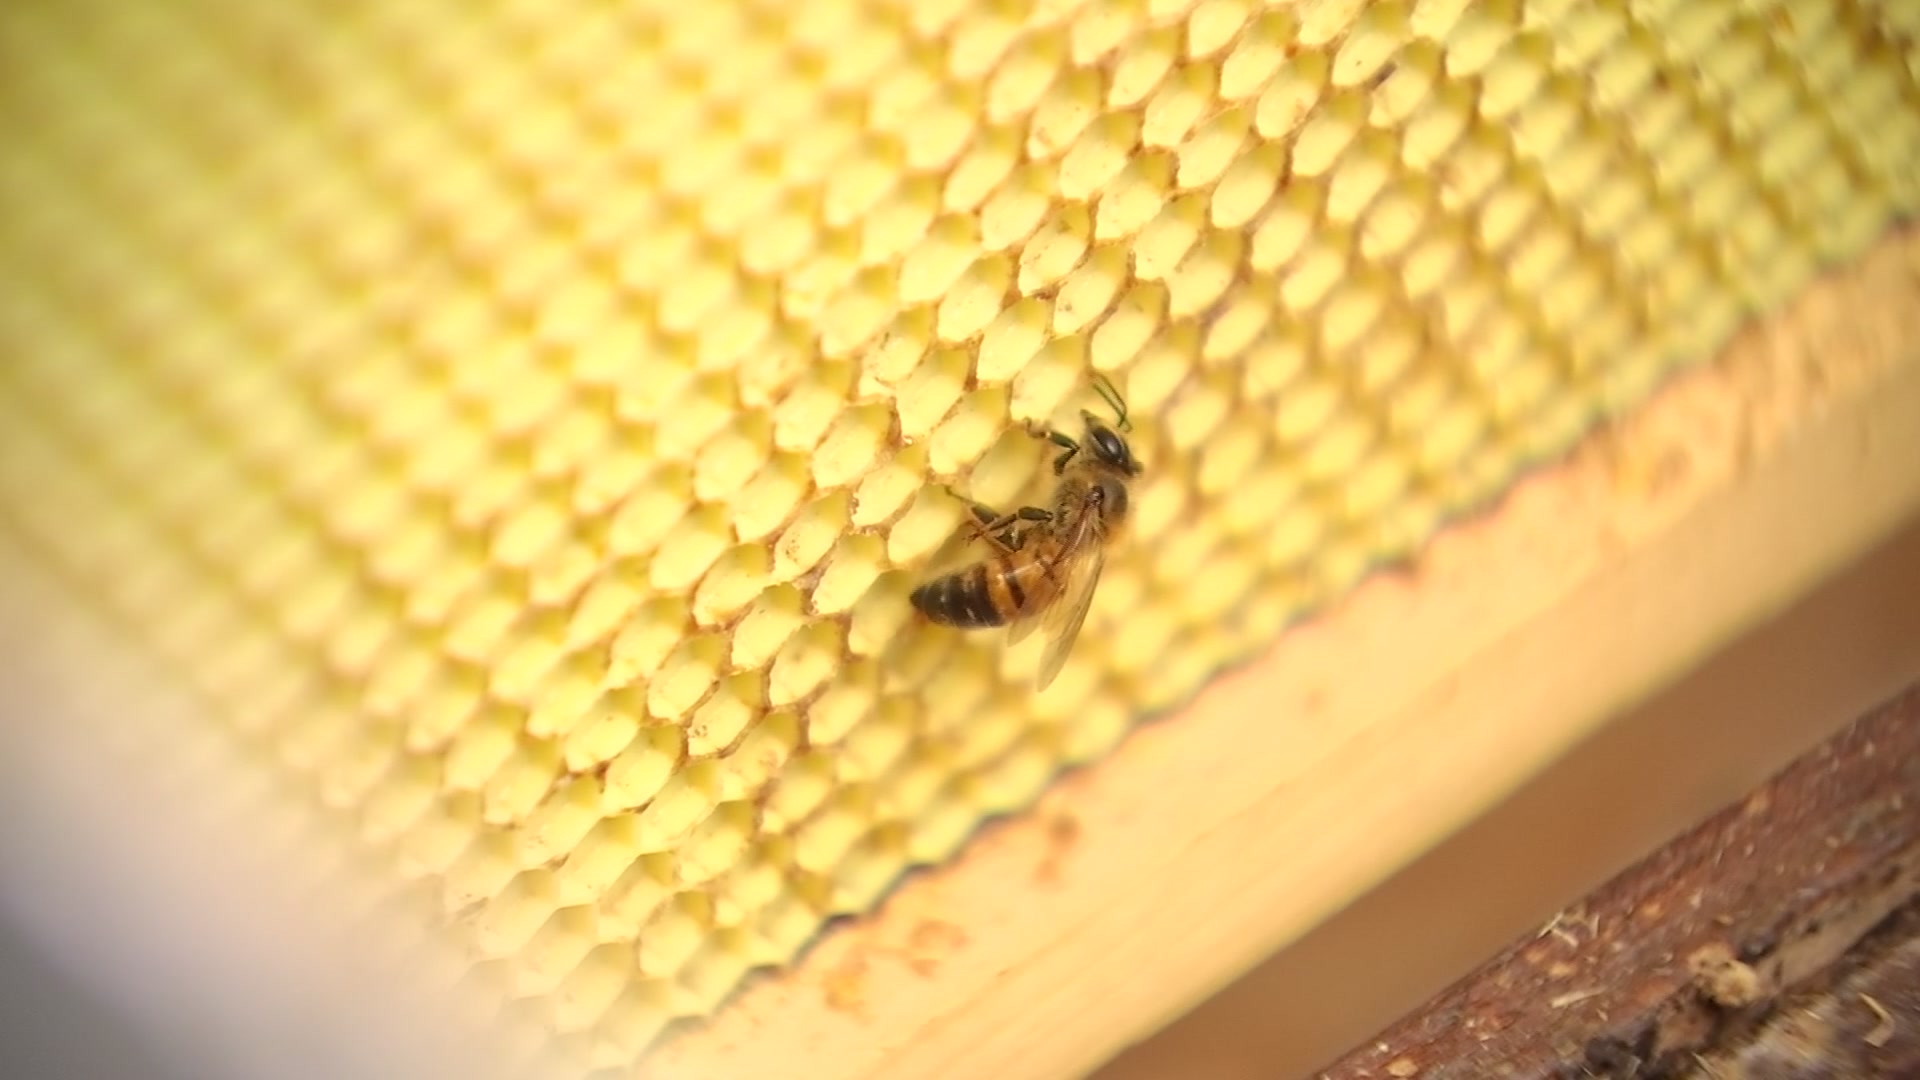 Dallas Couple Turns Beekeeping Hobby Into Fulltime Business – NBC 5 Dallas-Fort Worth